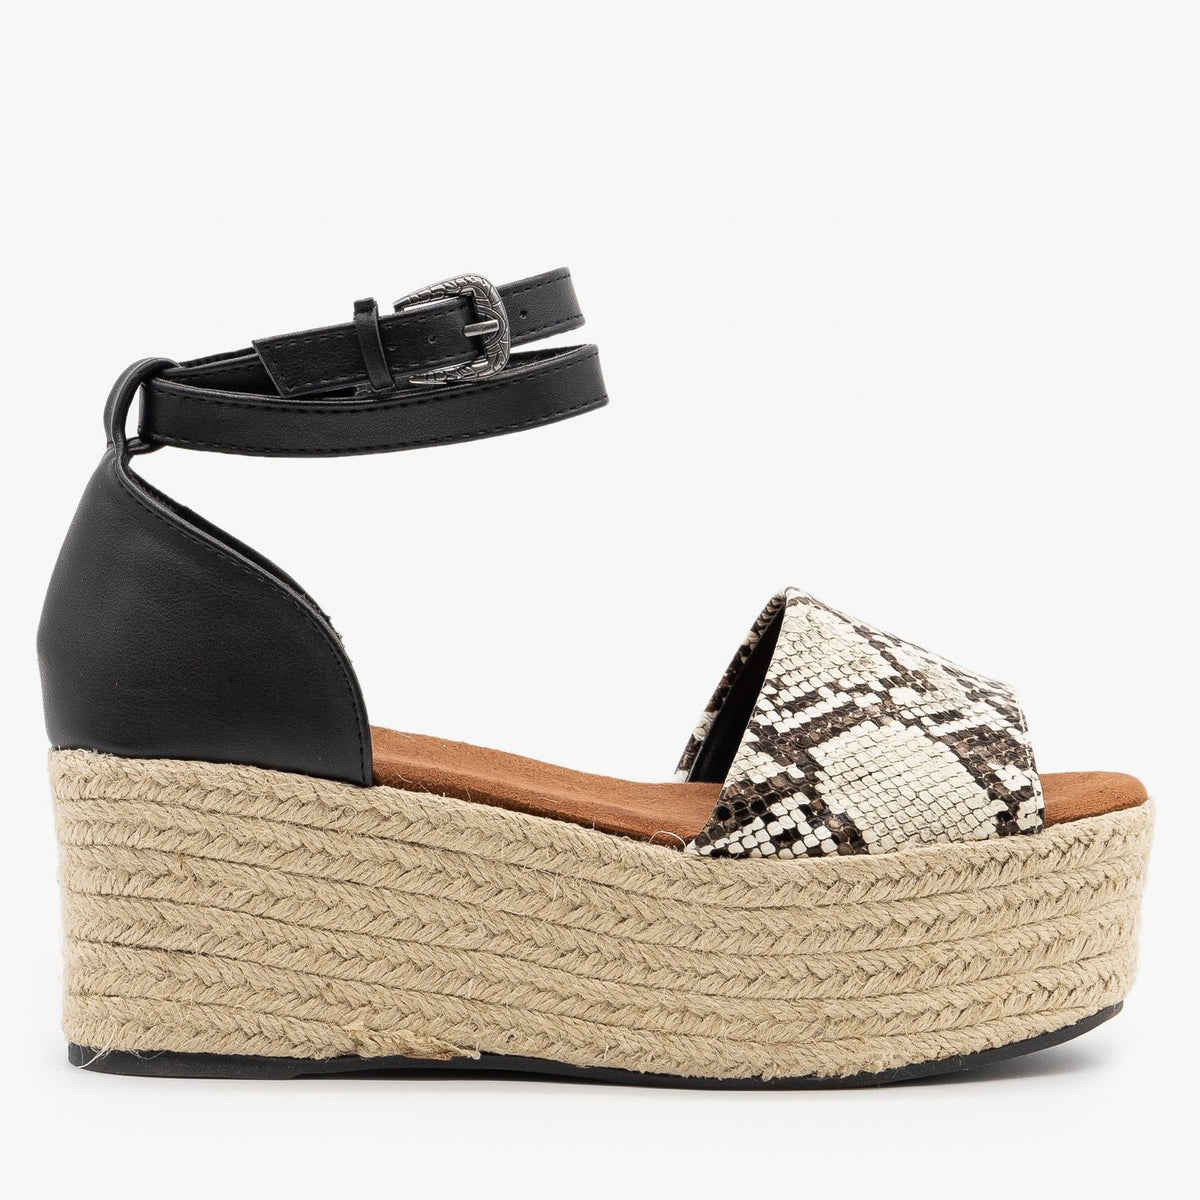 wedges wrap around ankle